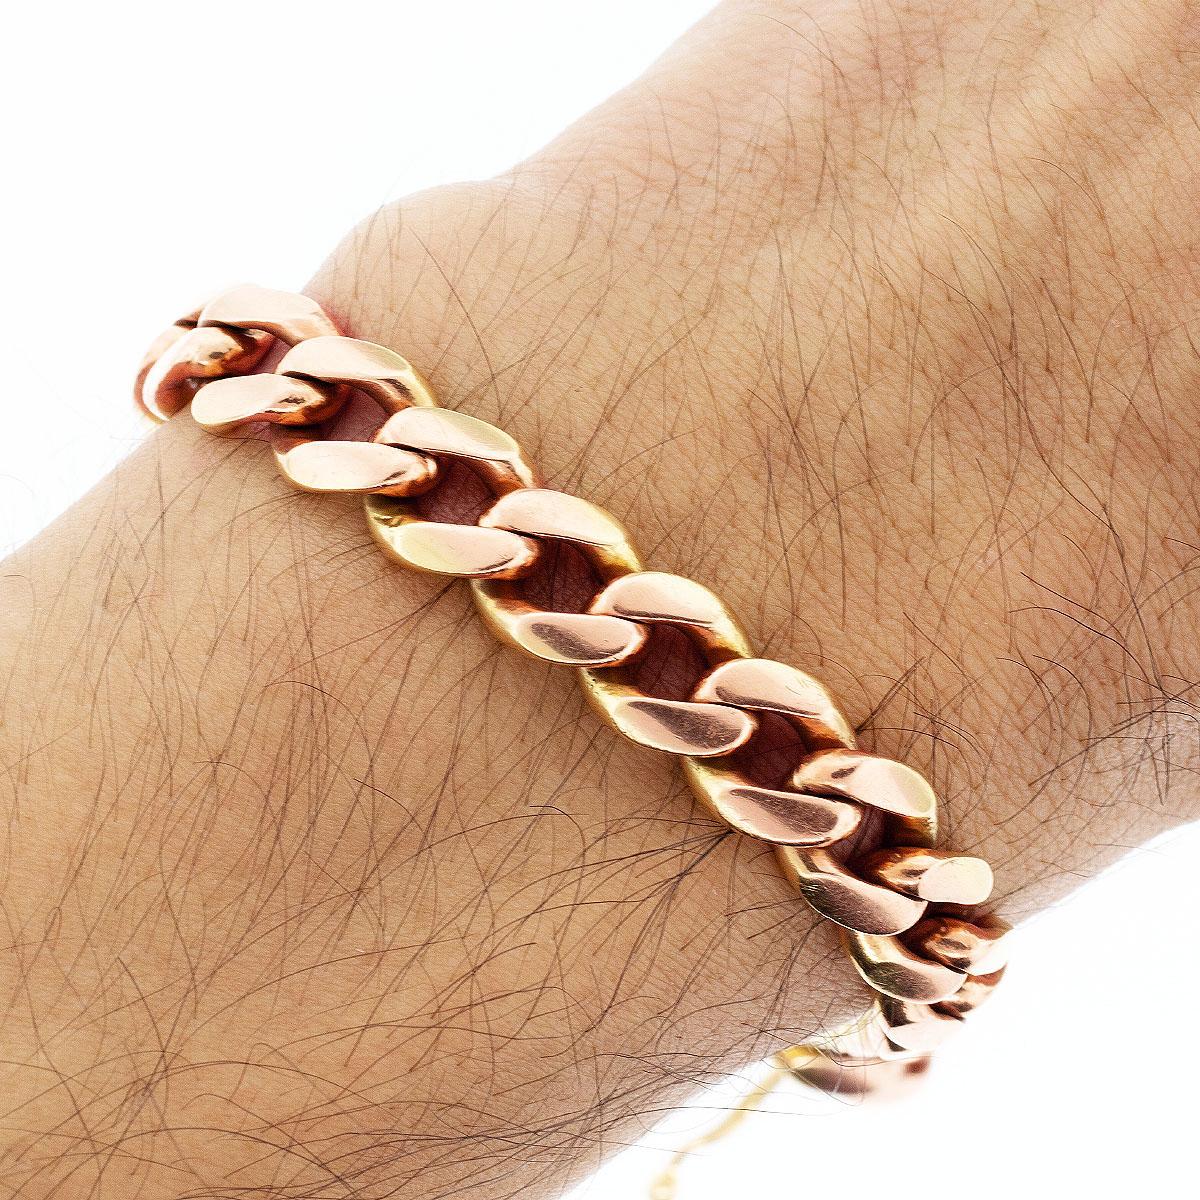 18k Rose Gold 9mm 9 inch Cuban Link Chain Bracelet

Company: Unbranded

Style of jewelry: Cuban link chain bracelet

Material: 18k Rose gold

Stones: No stones

Dimensions: 9mm in width, 9 inches in length

Weight: 59.2g (38.1dwt)

SKU: I-3157